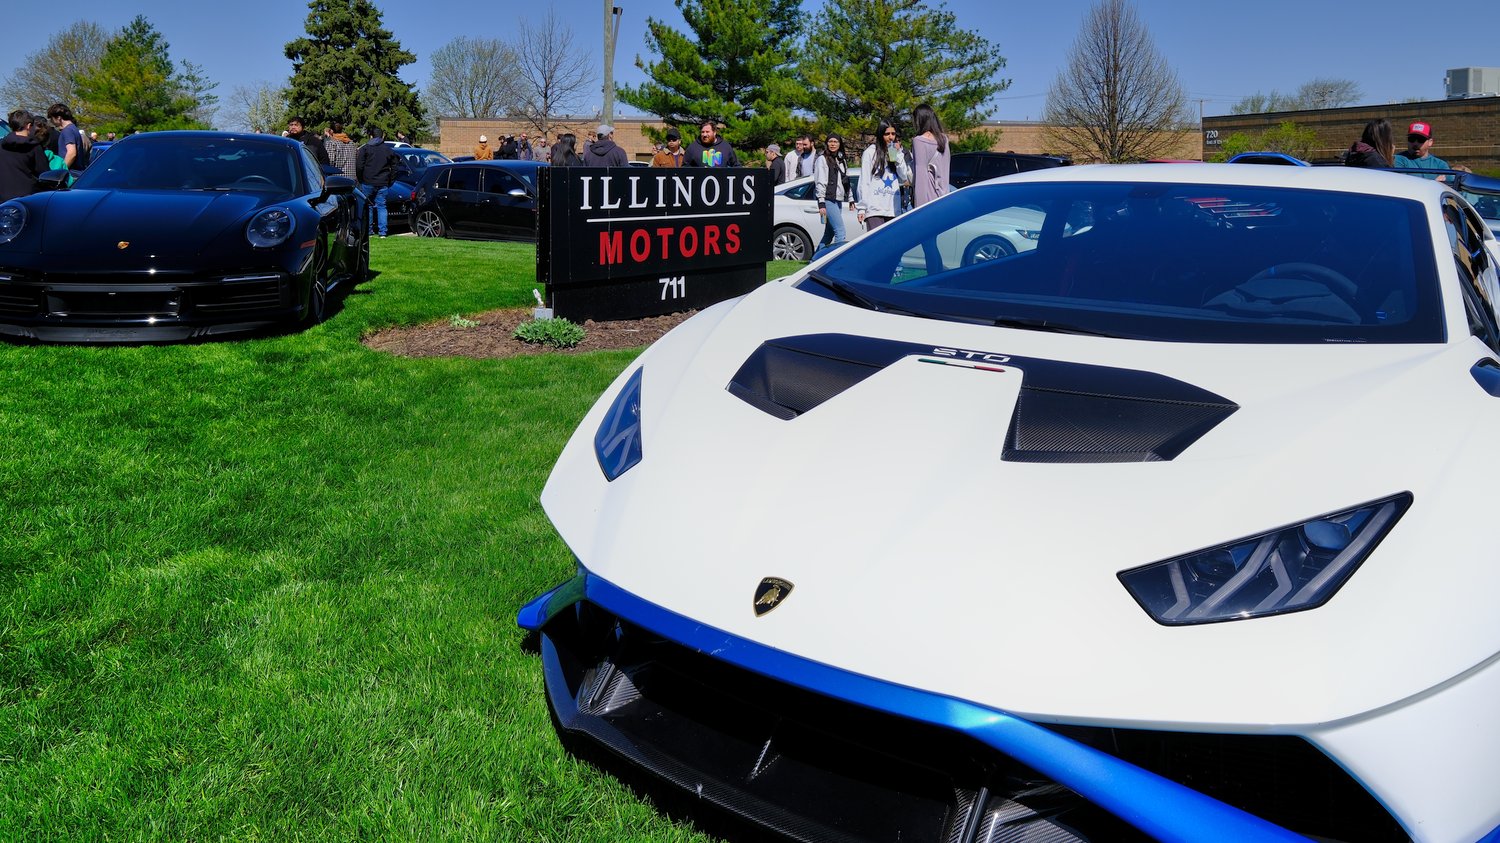 2nd annual Cars & Coffee car show at Illinois Motors.